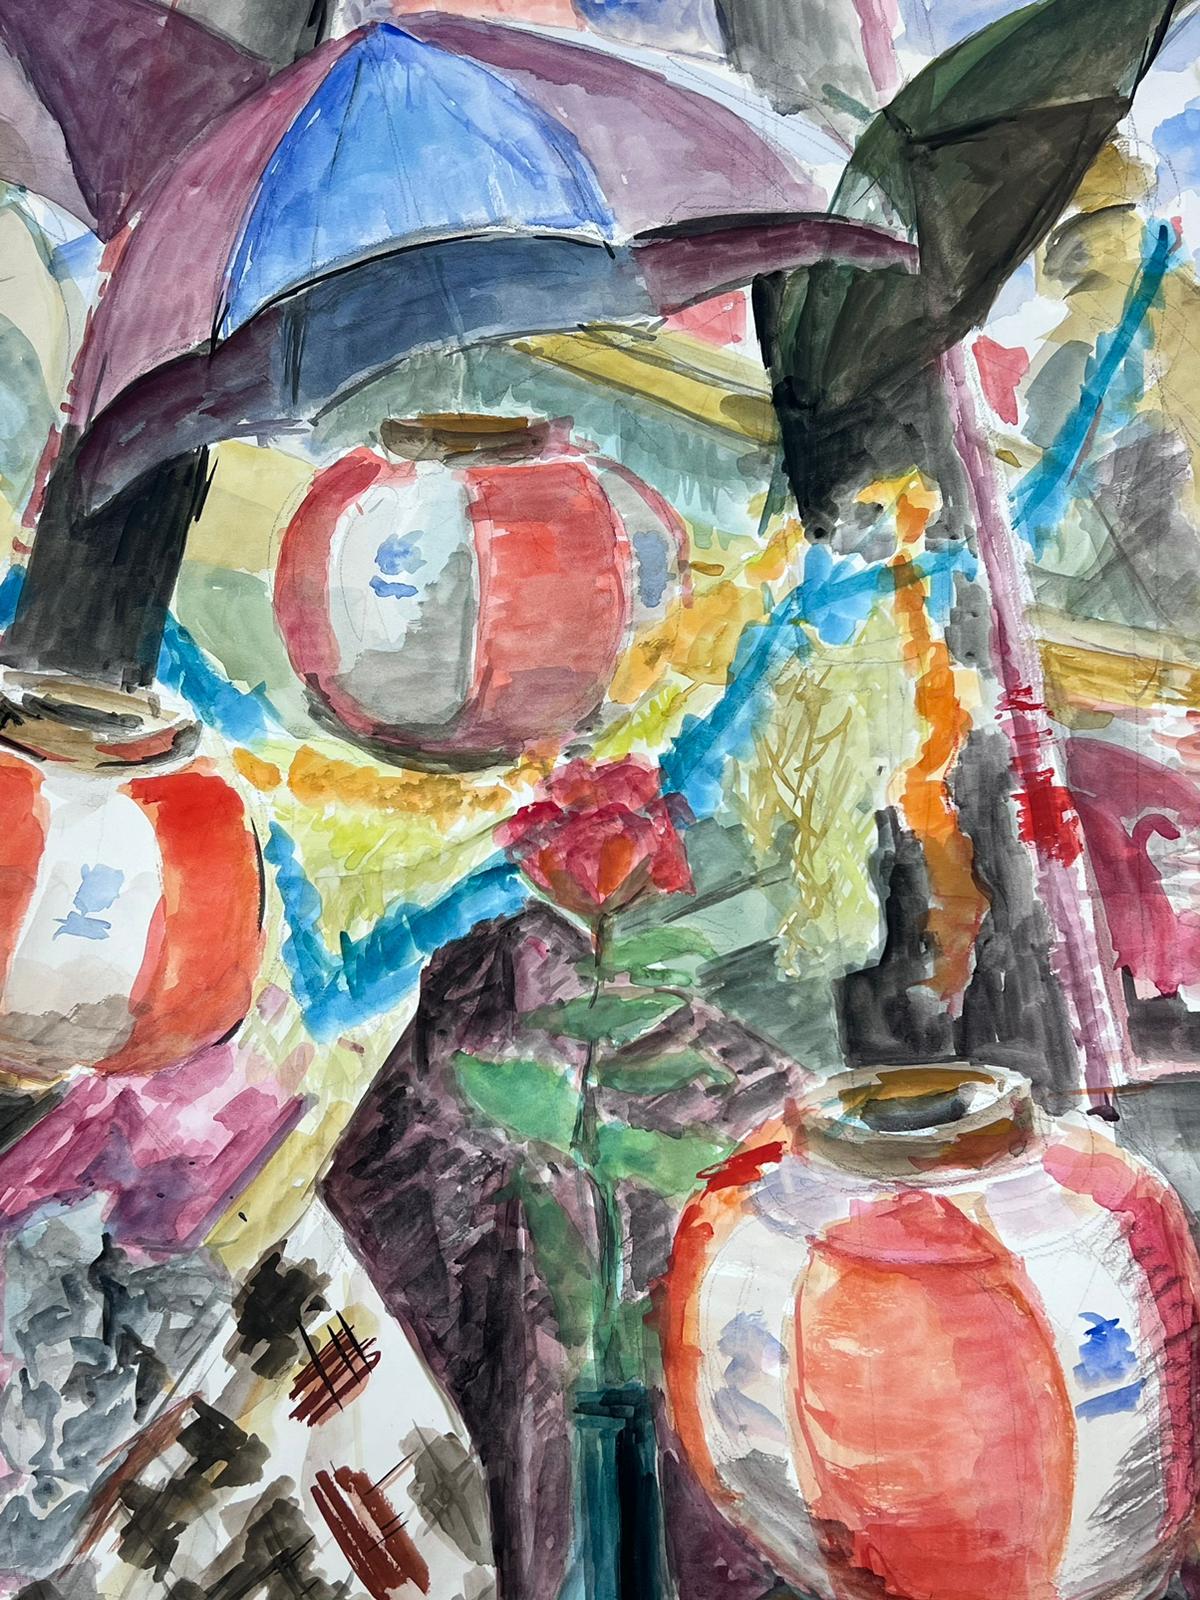 Still Life Composition
by Guy Nicod
(French 1923 - 2021)
watercolour on artist paper, unframed
painting : 26 x 19.5 inches
provenance: artists estate, France
condition: very good and sound condition